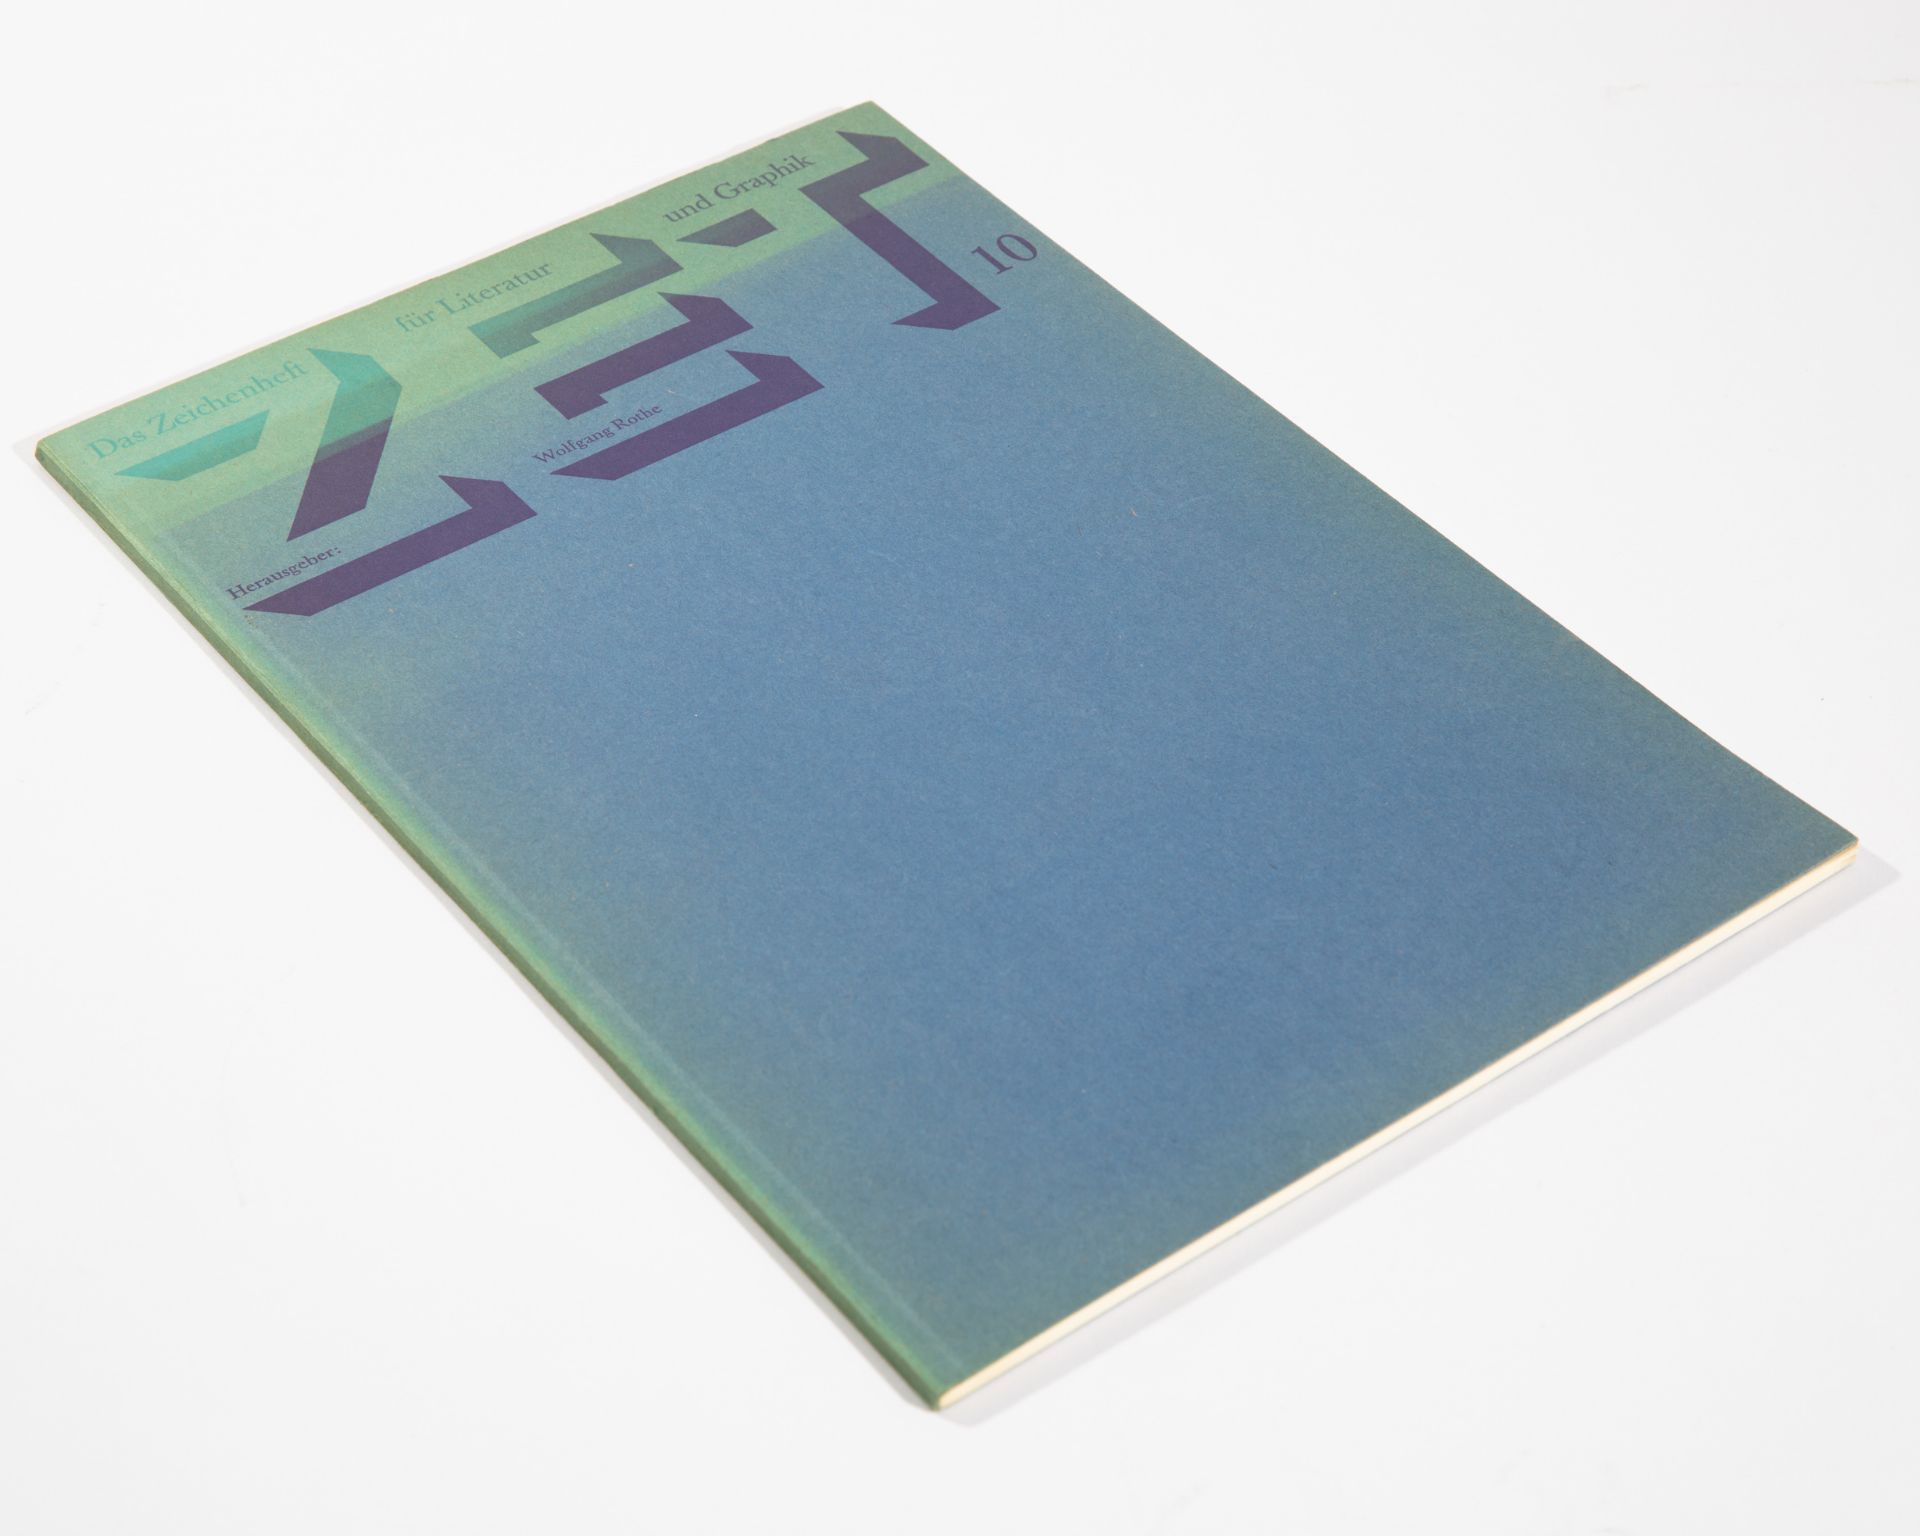 Günther Uecker*, nail head embossing, 1975. In ZET issue 10 - Image 3 of 6